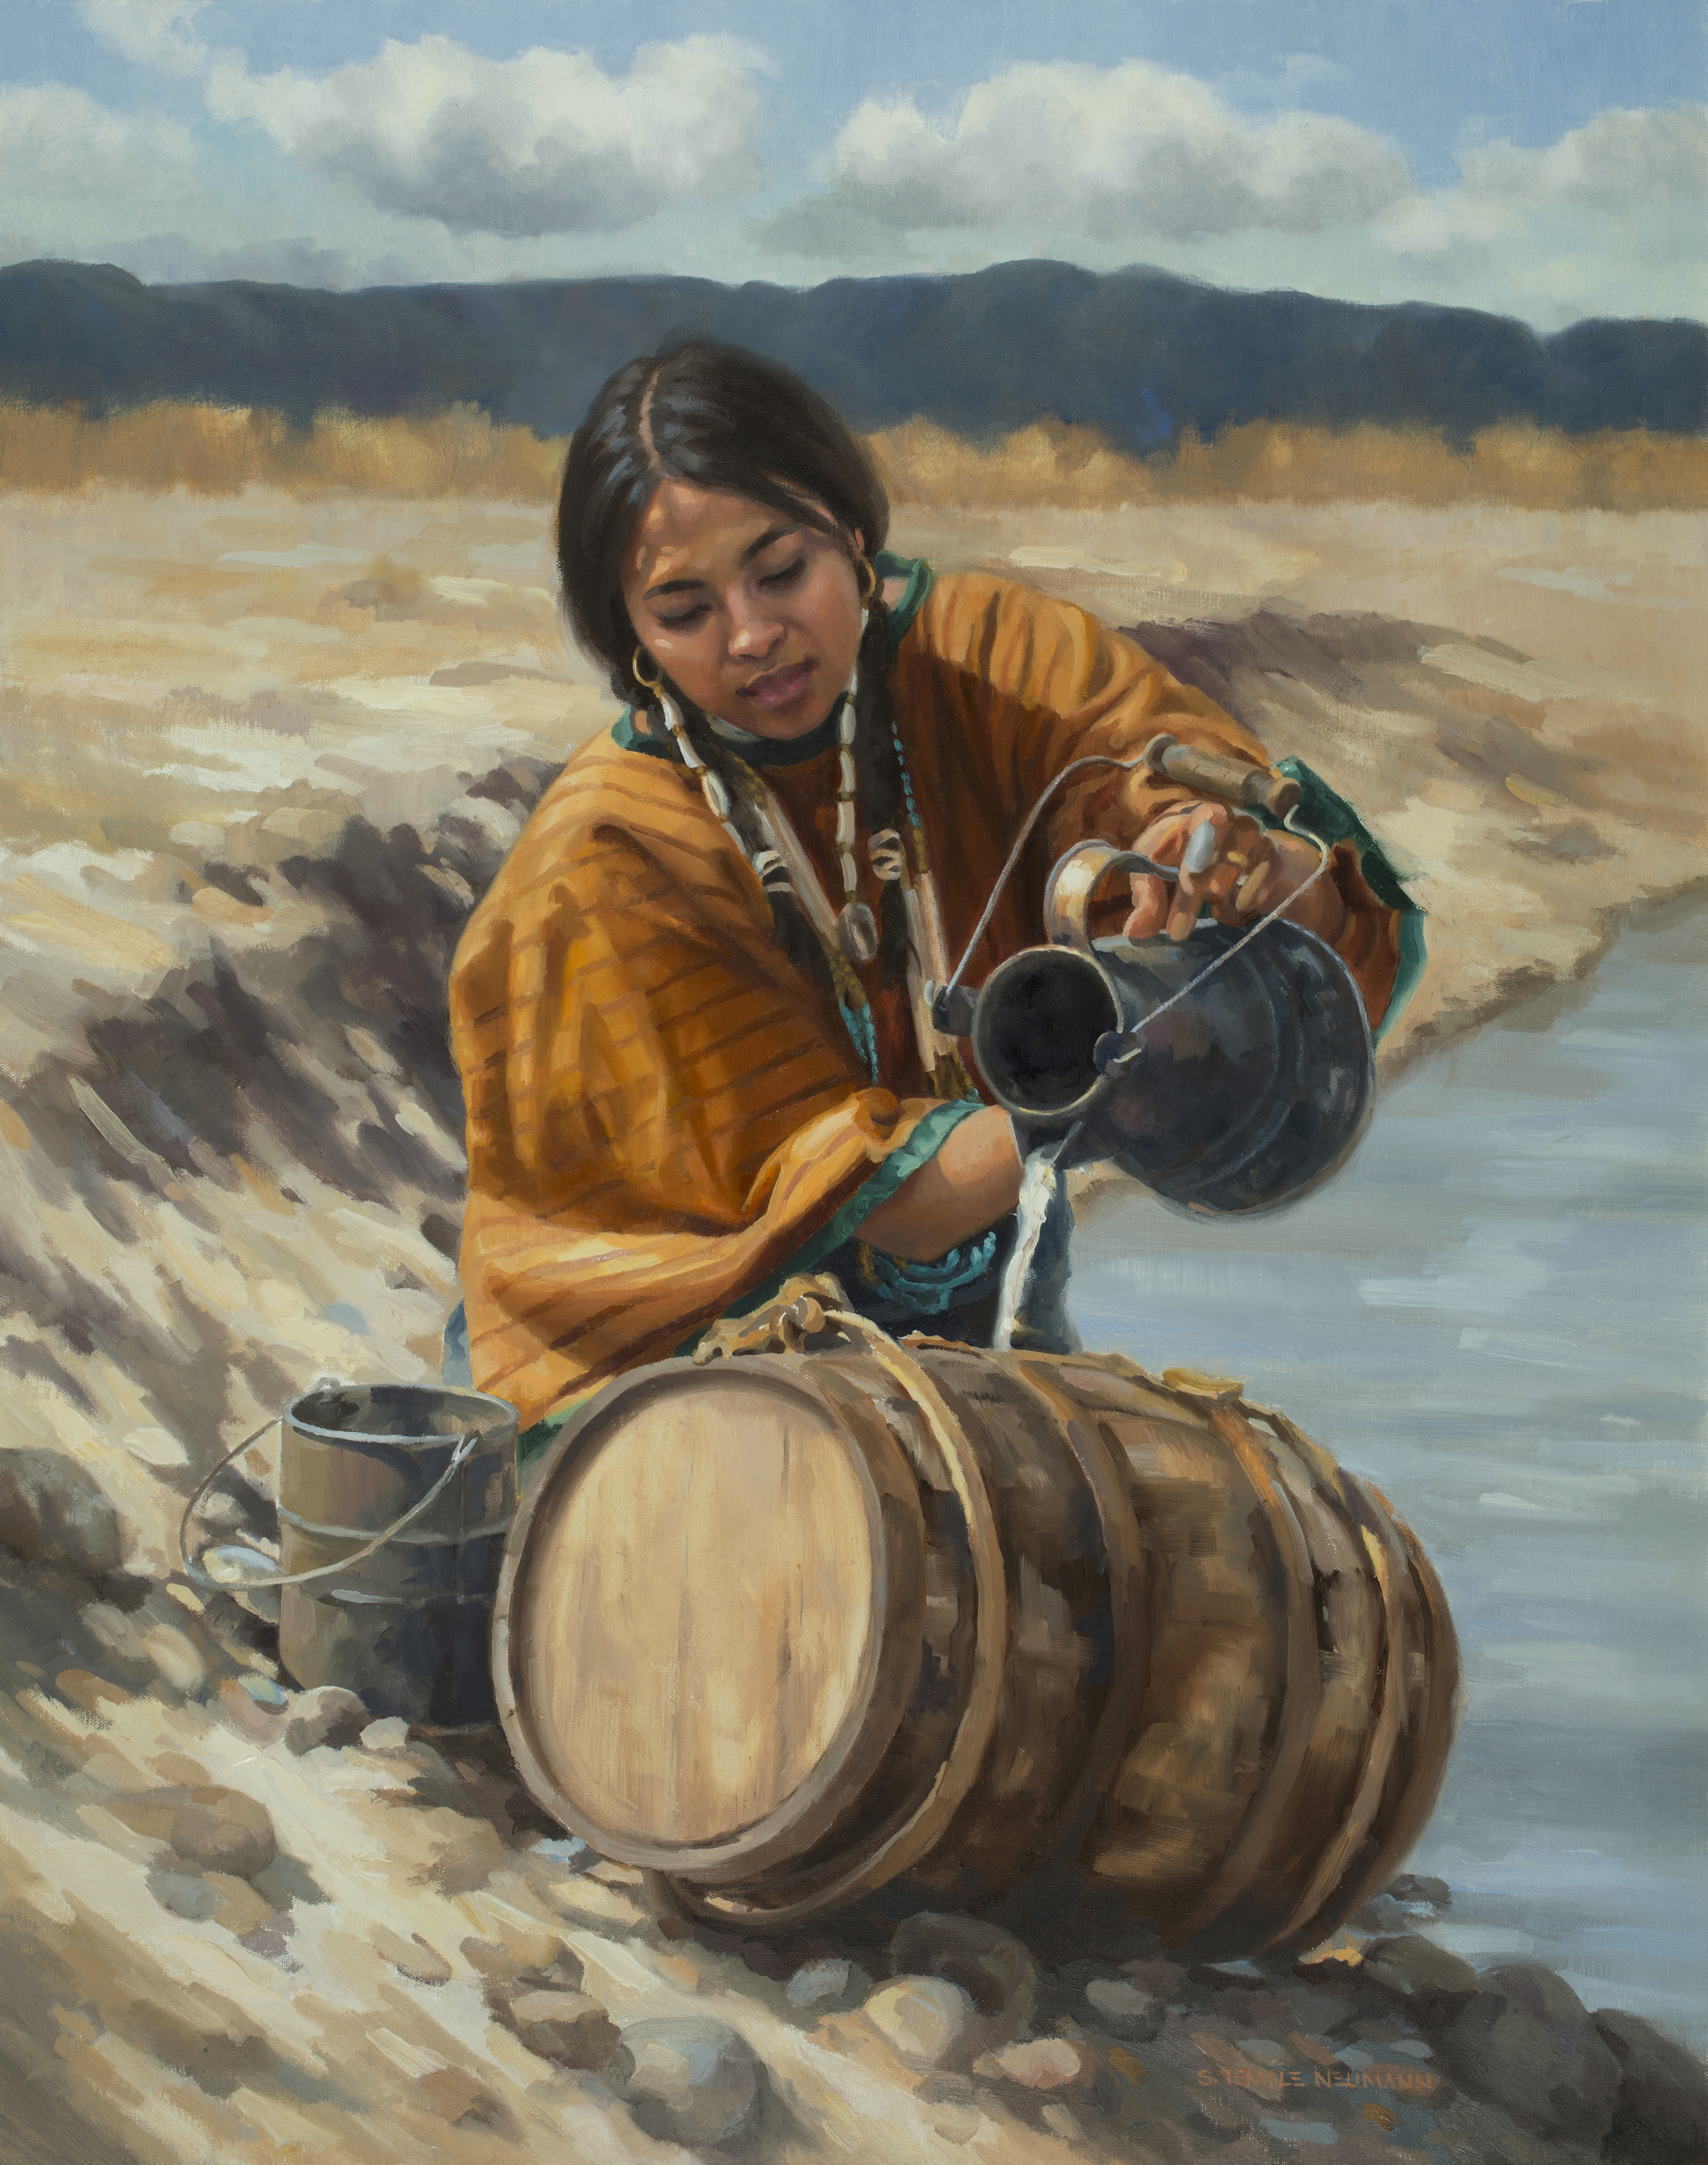 painting of a native american woman kneeling by a river